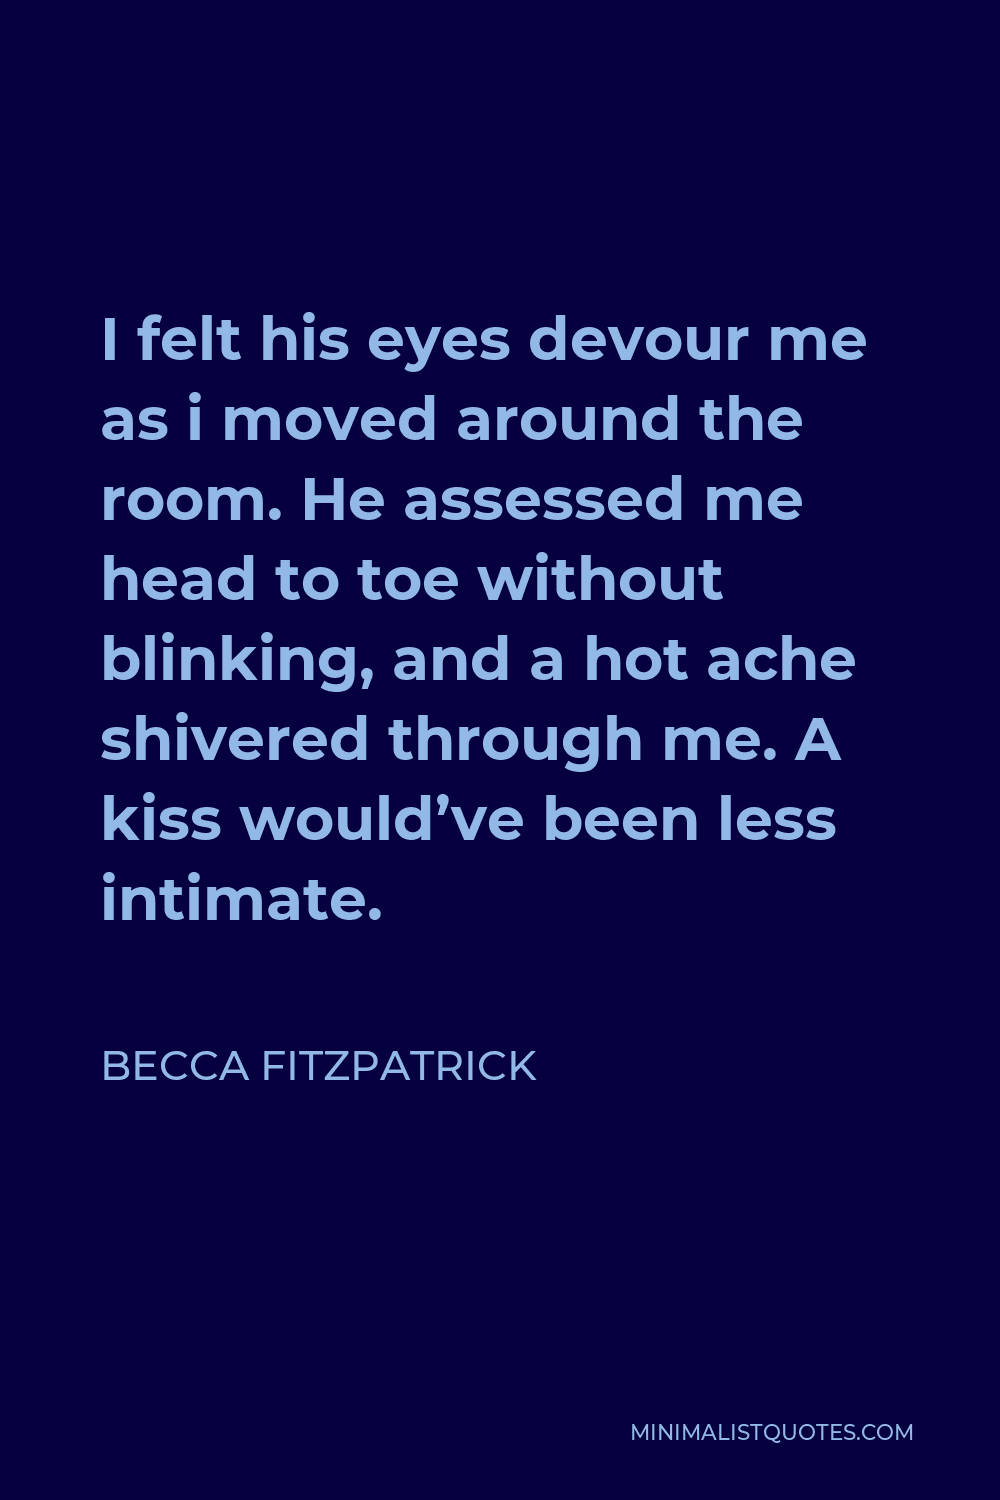 Becca Fitzpatrick Quote - I felt his eyes devour me as i moved around the room. He assessed me head to toe without blinking, and a hot ache shivered through me. A kiss would’ve been less intimate.